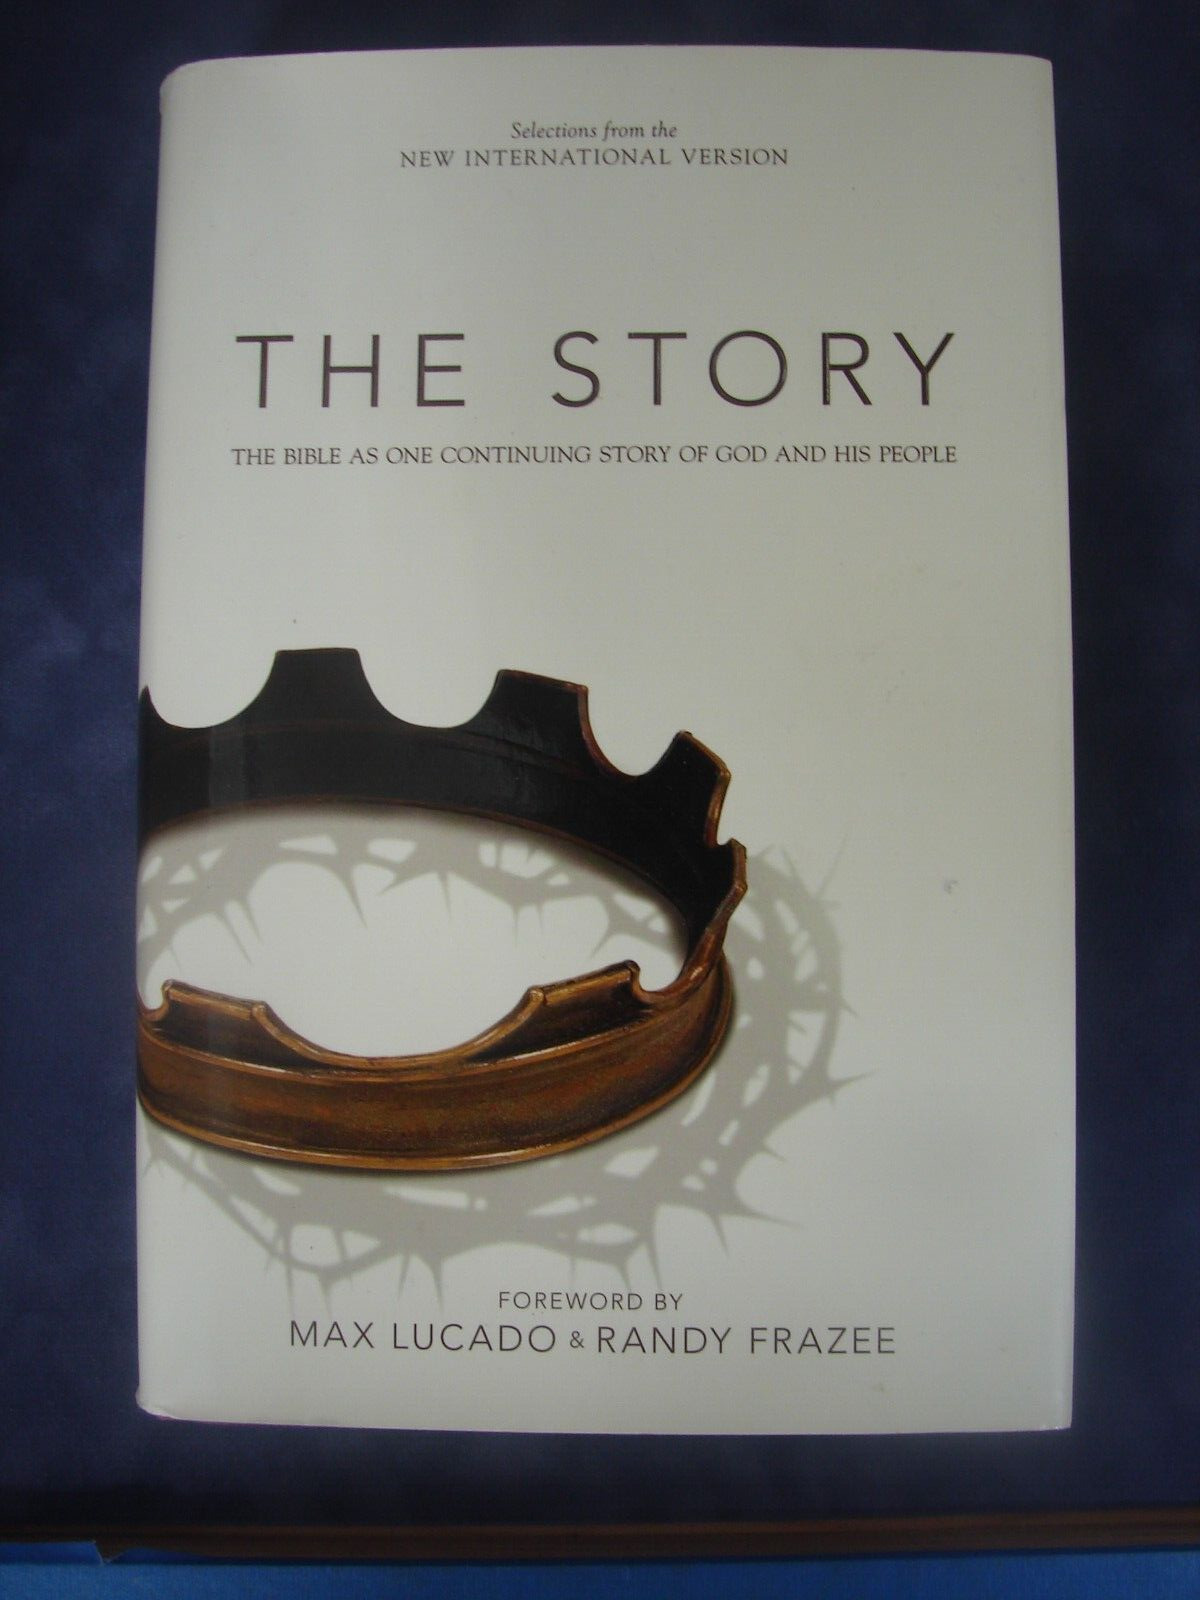 The Story by Max Lucado & Randy Frazee  2011  with DC.  Great condition,  H166